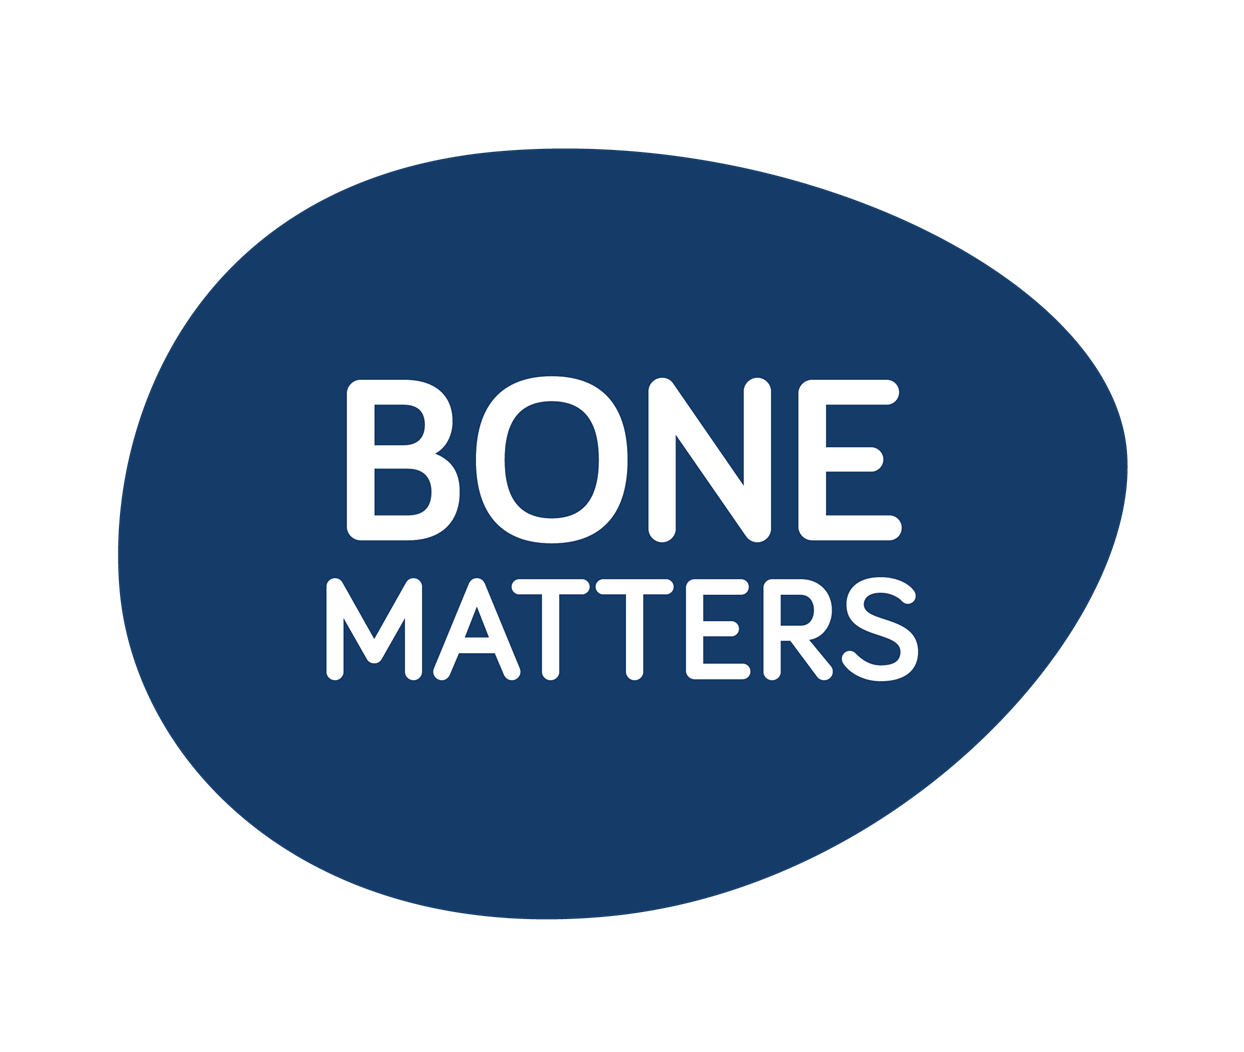 #BoneMatters - online information events from the ROS